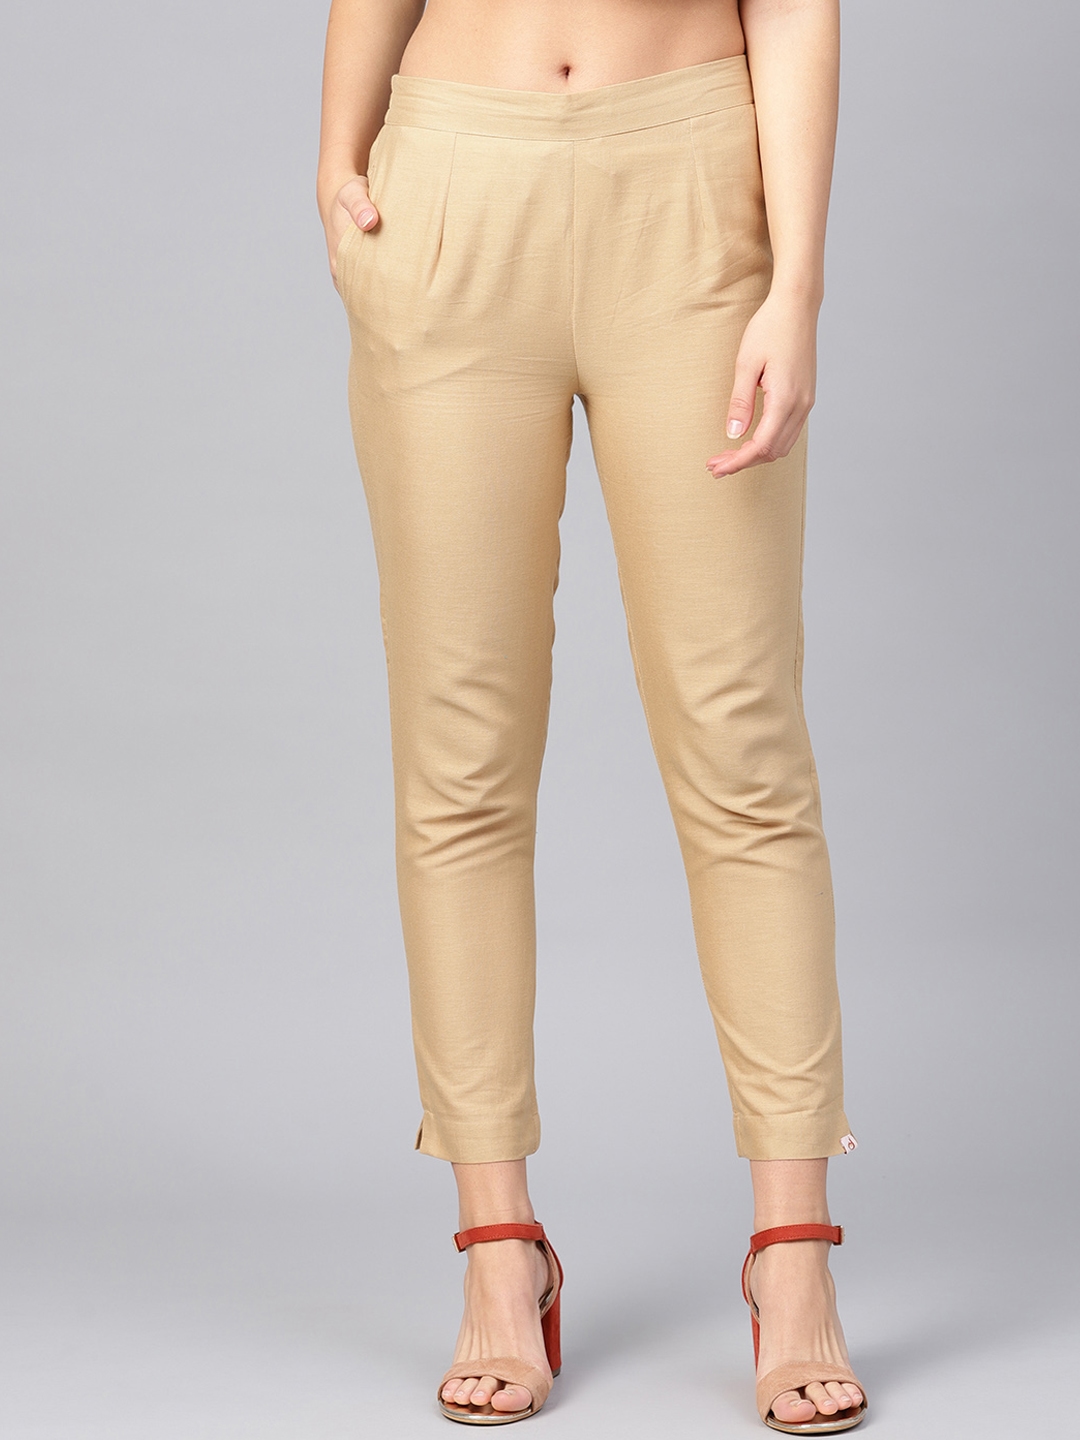 Share more than 93 myntra casual pants latest - in.eteachers